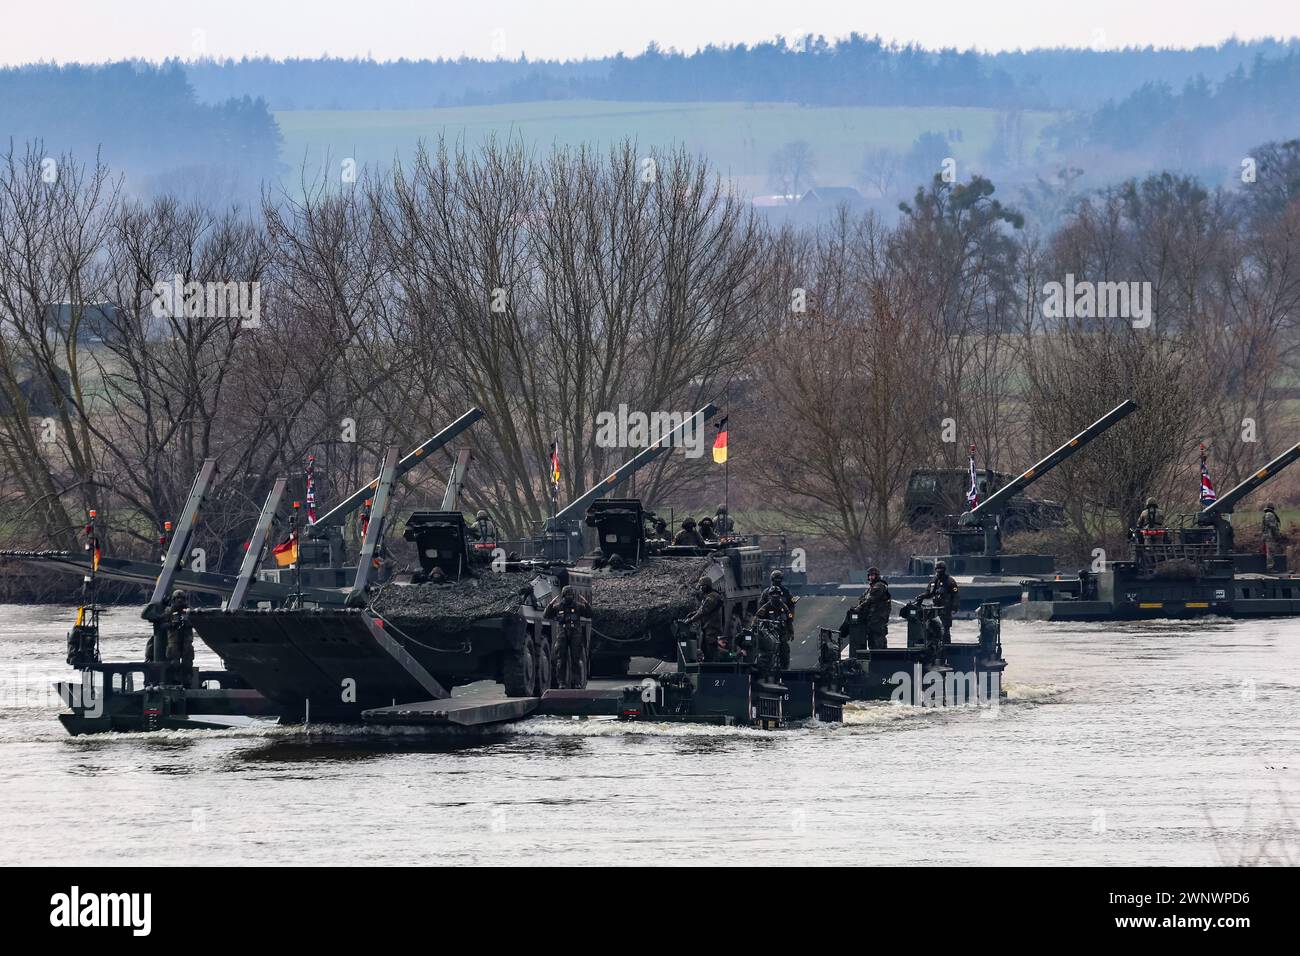 Korzeniewo, Poland on March 4, 2024. German flagged NATO soldiers exercise ability to cross Boxer armored vehicles through Vistula river on ferries during NATO's  Dragon-24 exercise, a part of large scale Steadfast Defender-24 exercise. The Steadfast Defender-2 exercises, which will take place mainly in Central Europe, will involve some 90,000 troops from all NATO countries as well as Sweden. Their aim is to deter and present defensive abilities in the face of aggression. Stock Photo